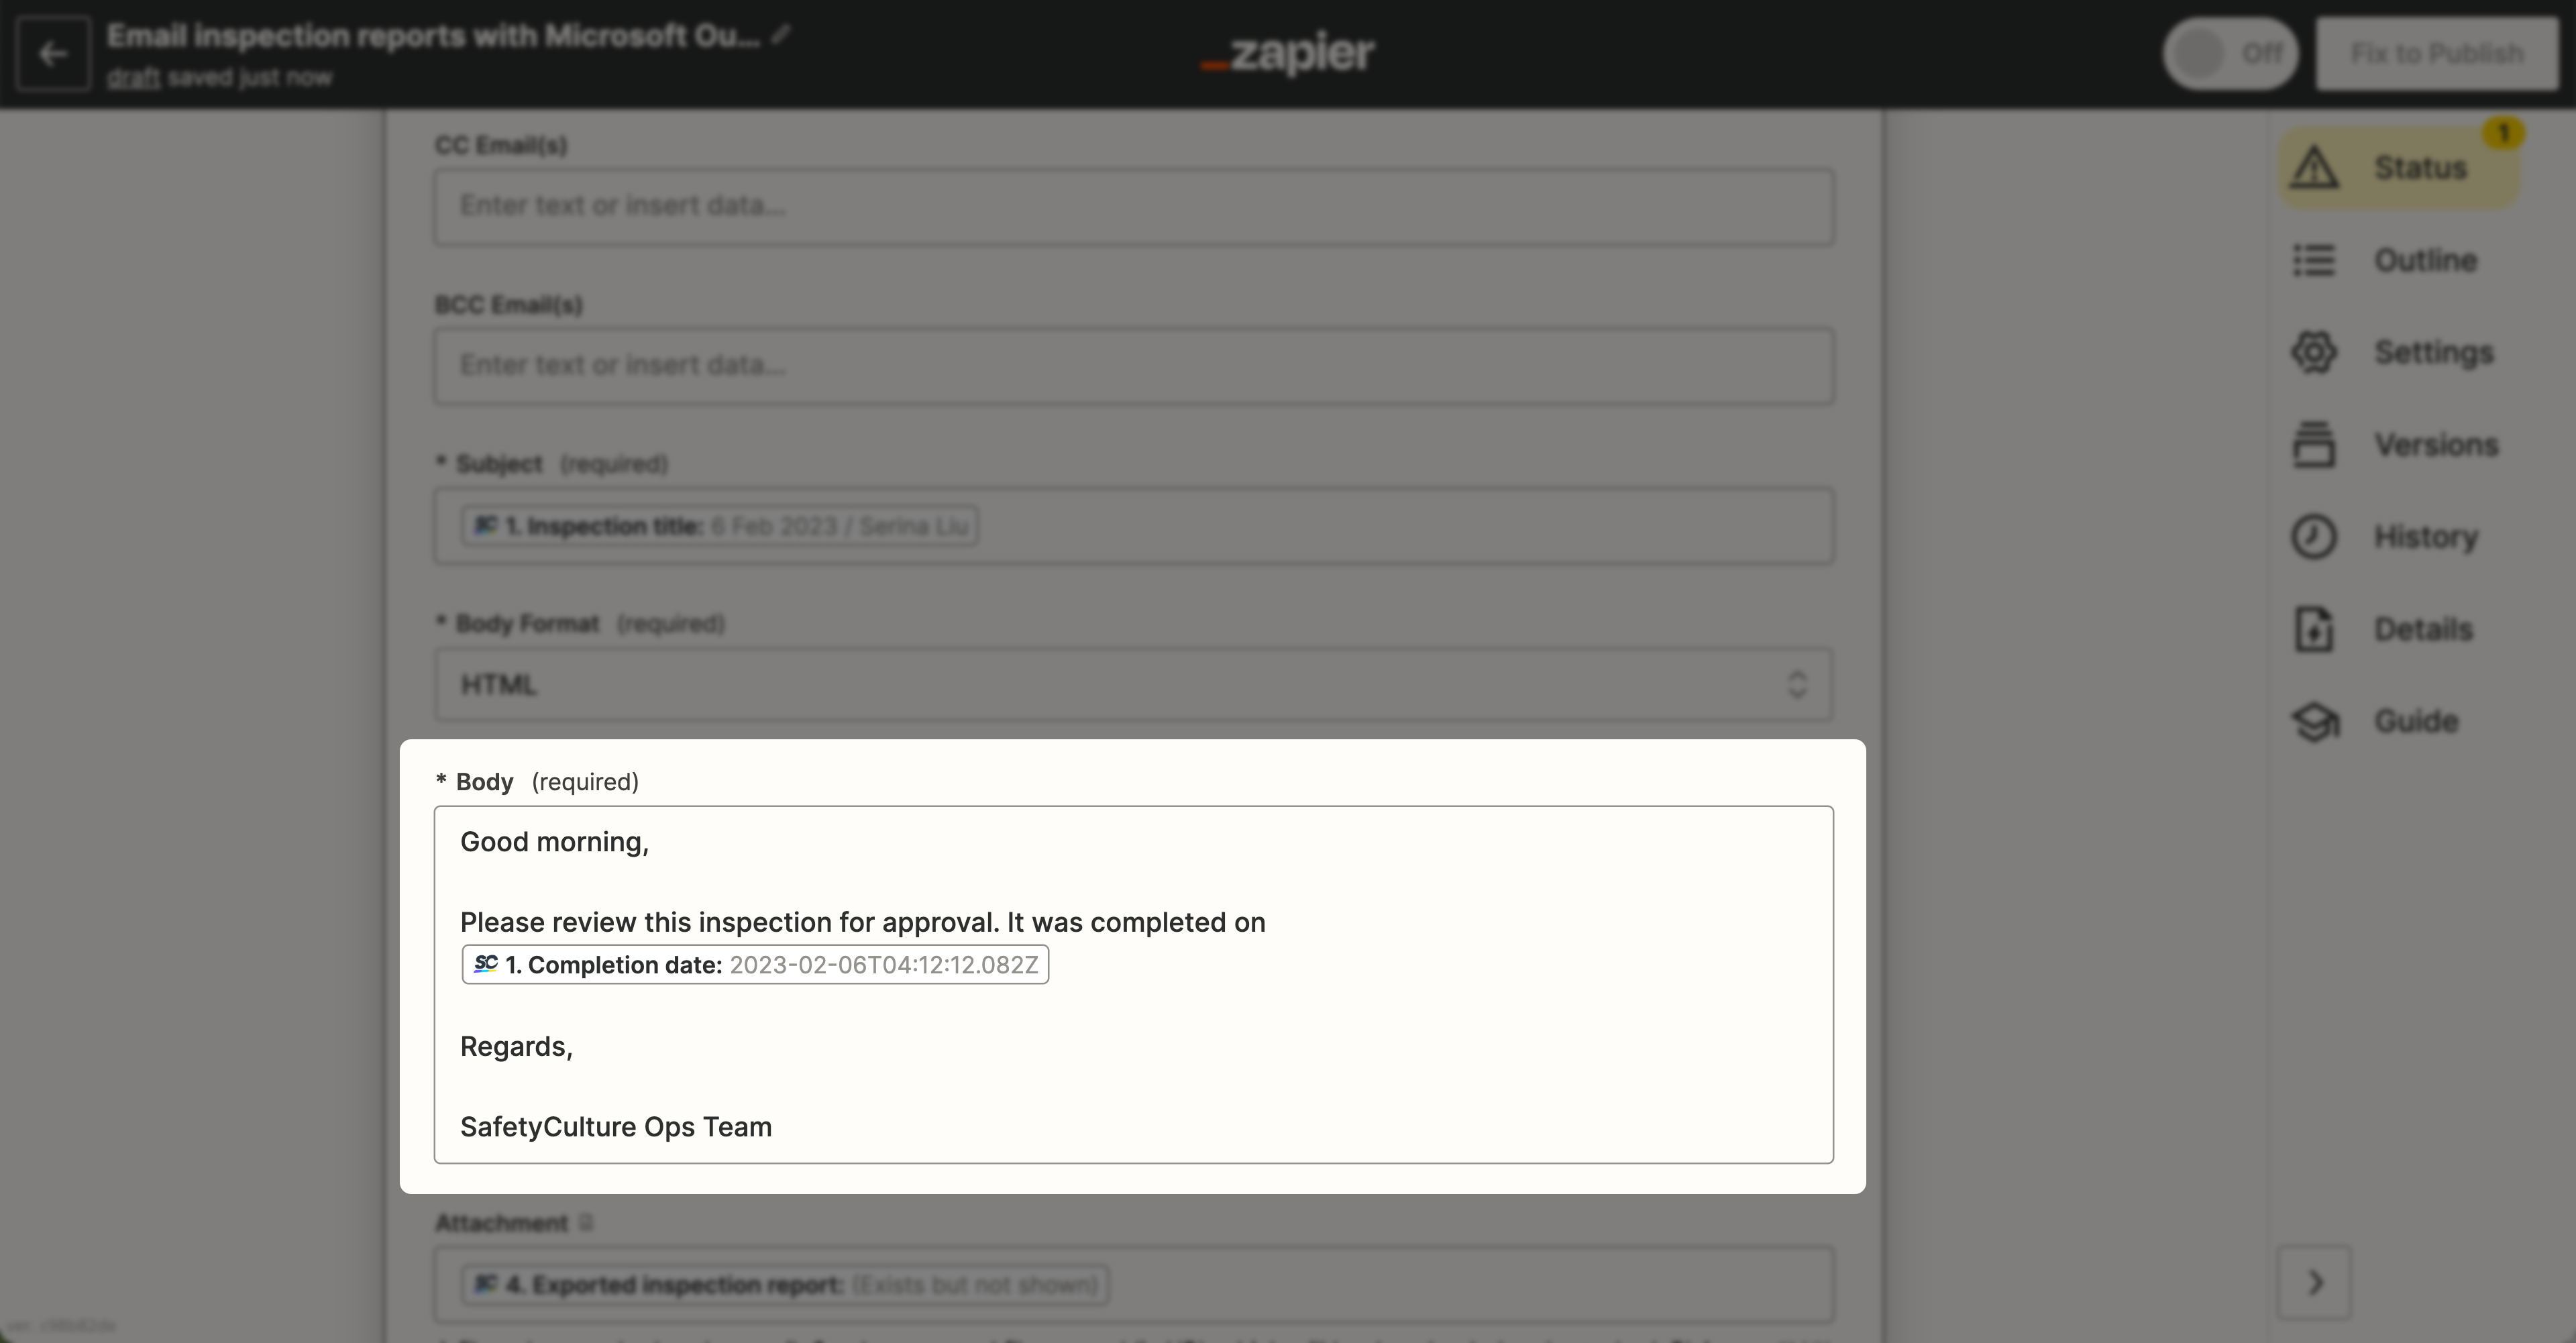 Automatically email inspection reports with Zapier via Microsoft Outlook.